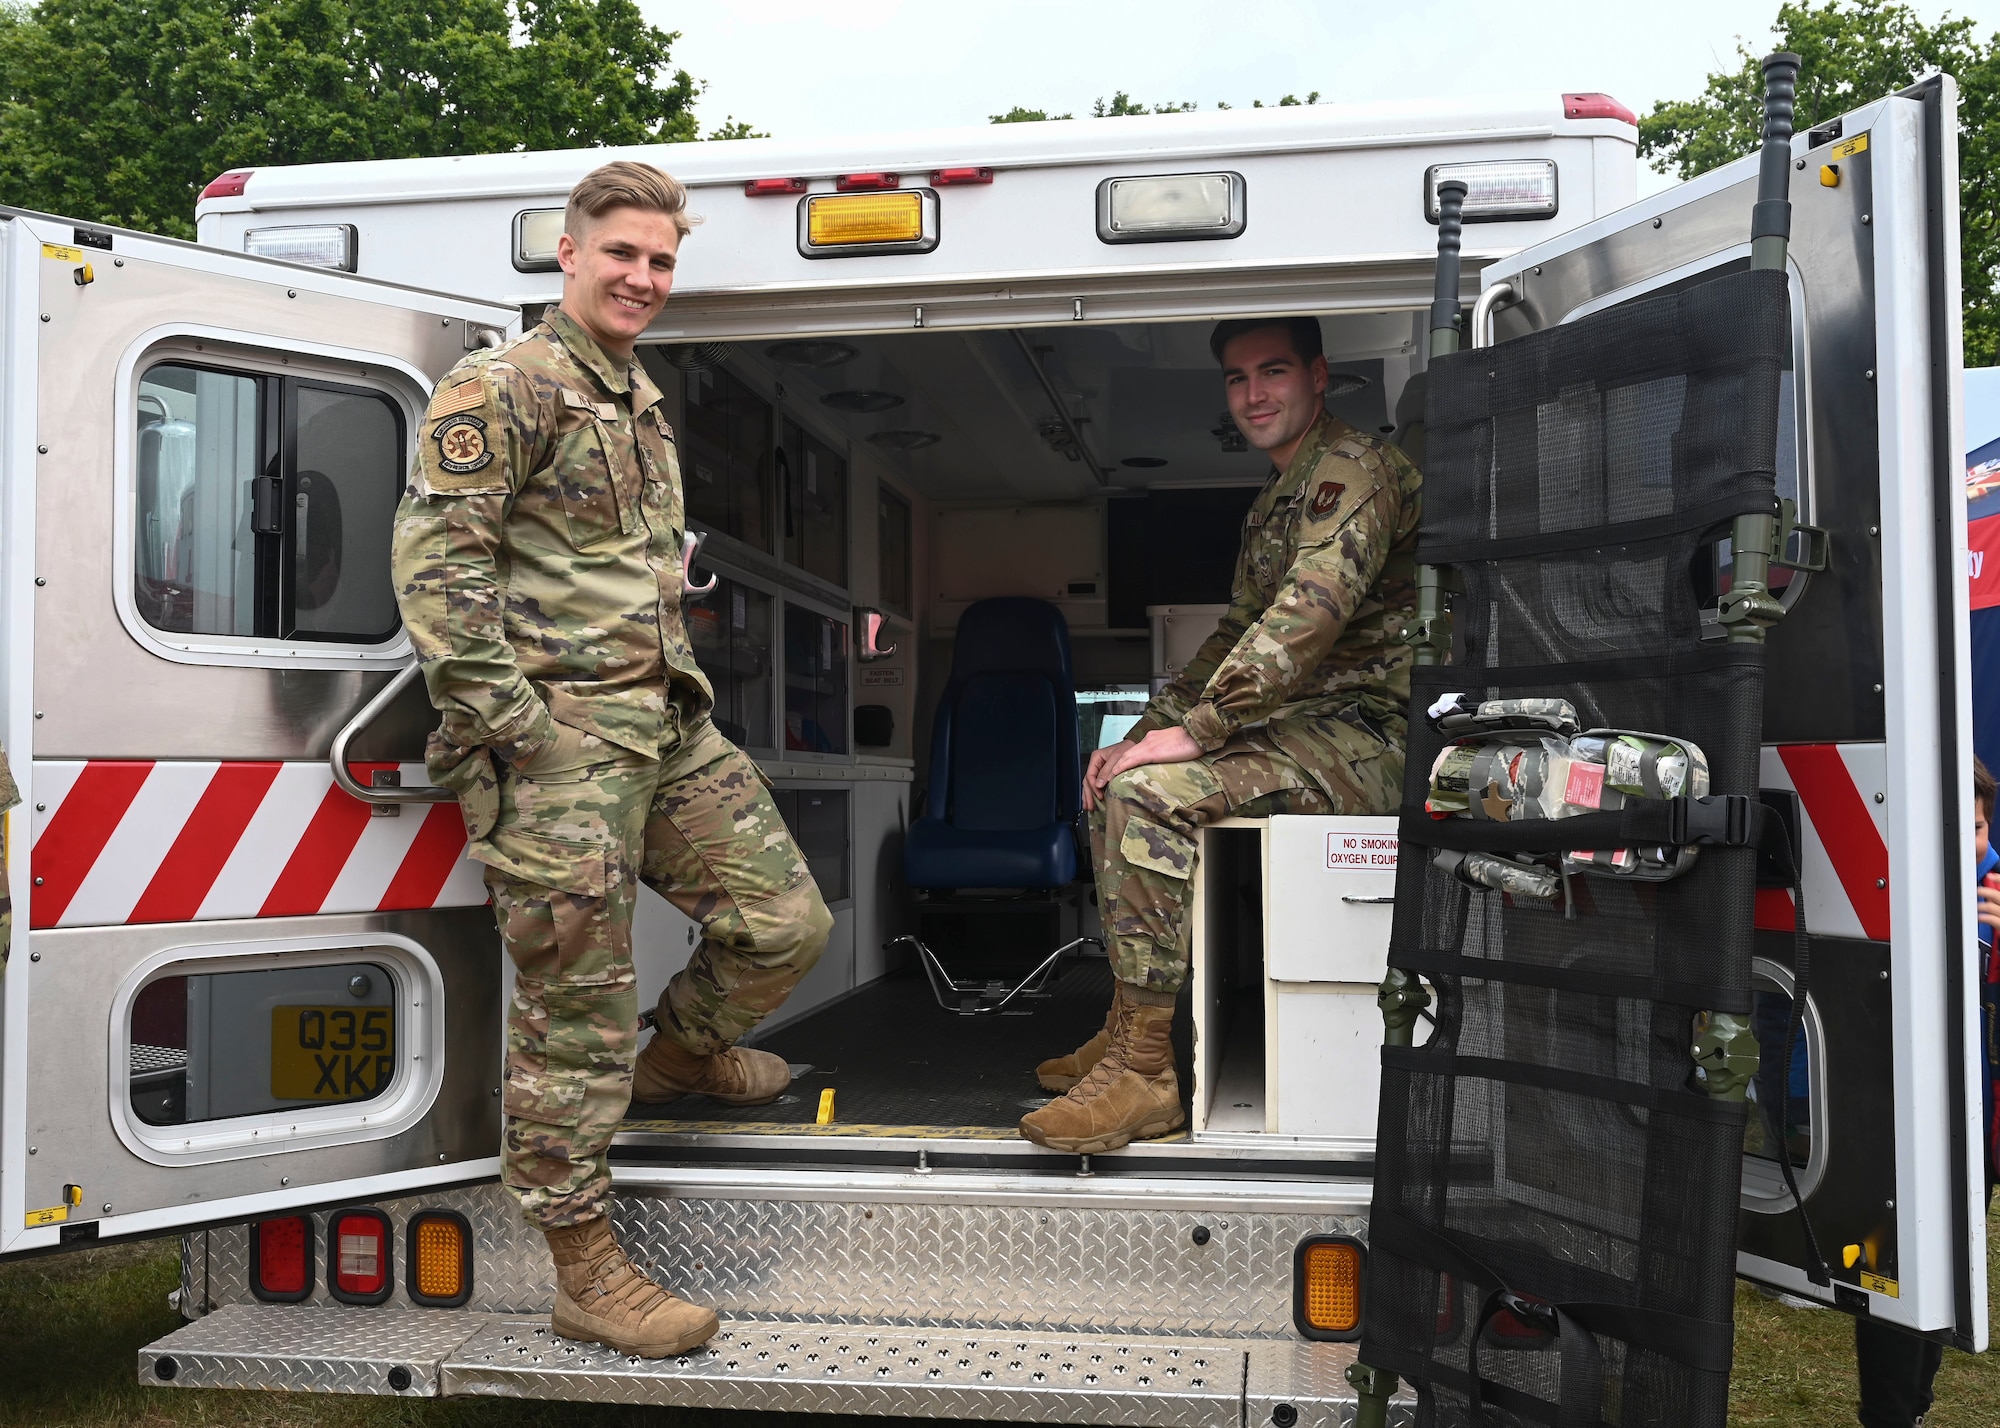 The Suffolk Show provided U.S. visiting forces an opportunity to work with Suffolk military units to strengthen ties in the community.